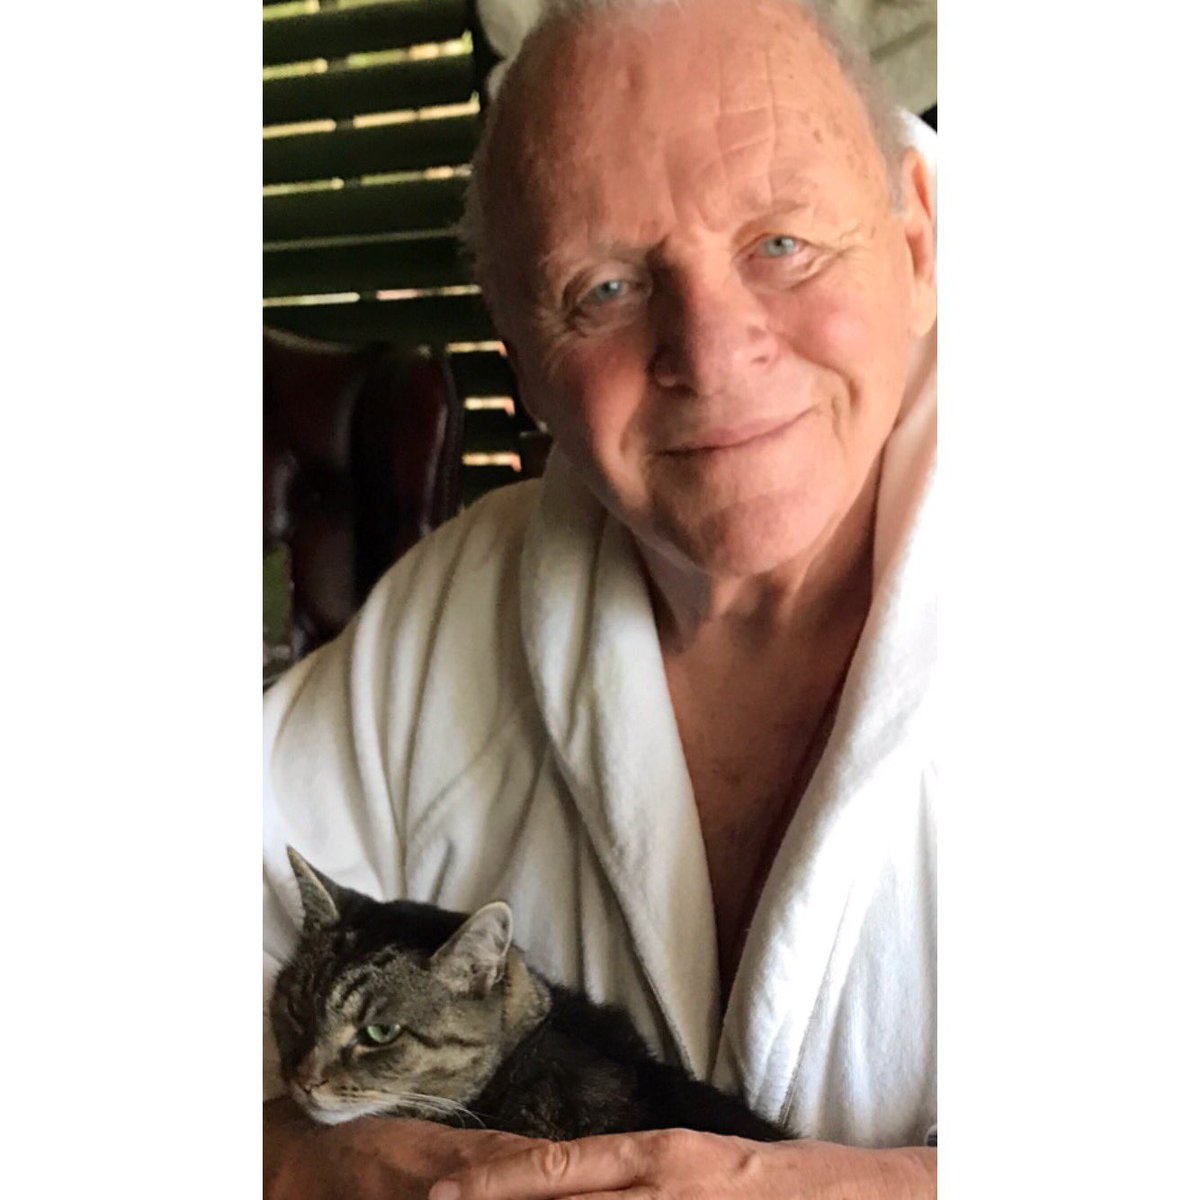 RT @AnthonyHopkins: Have a wonderful weekend everyone. https://t.co/hhOHw8dRax